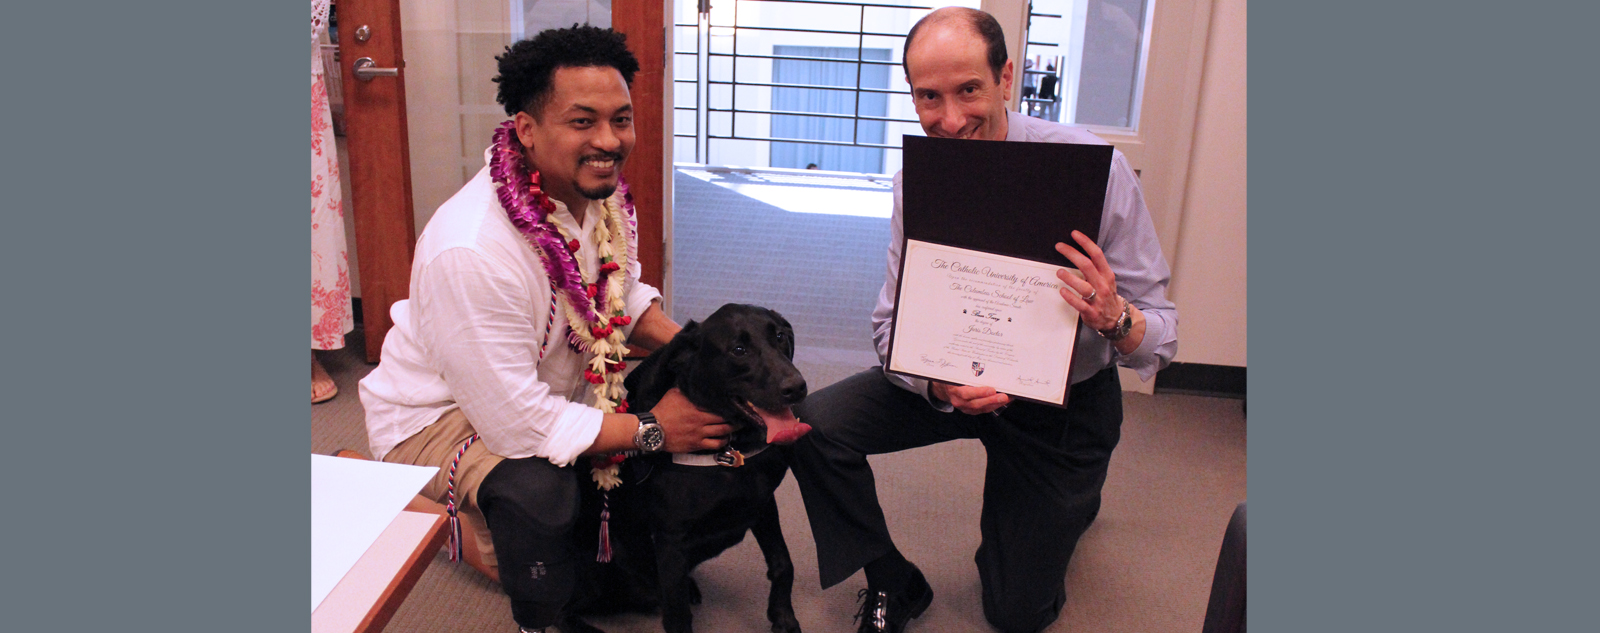 A law student having his service dog presented with a diploma from the registrar